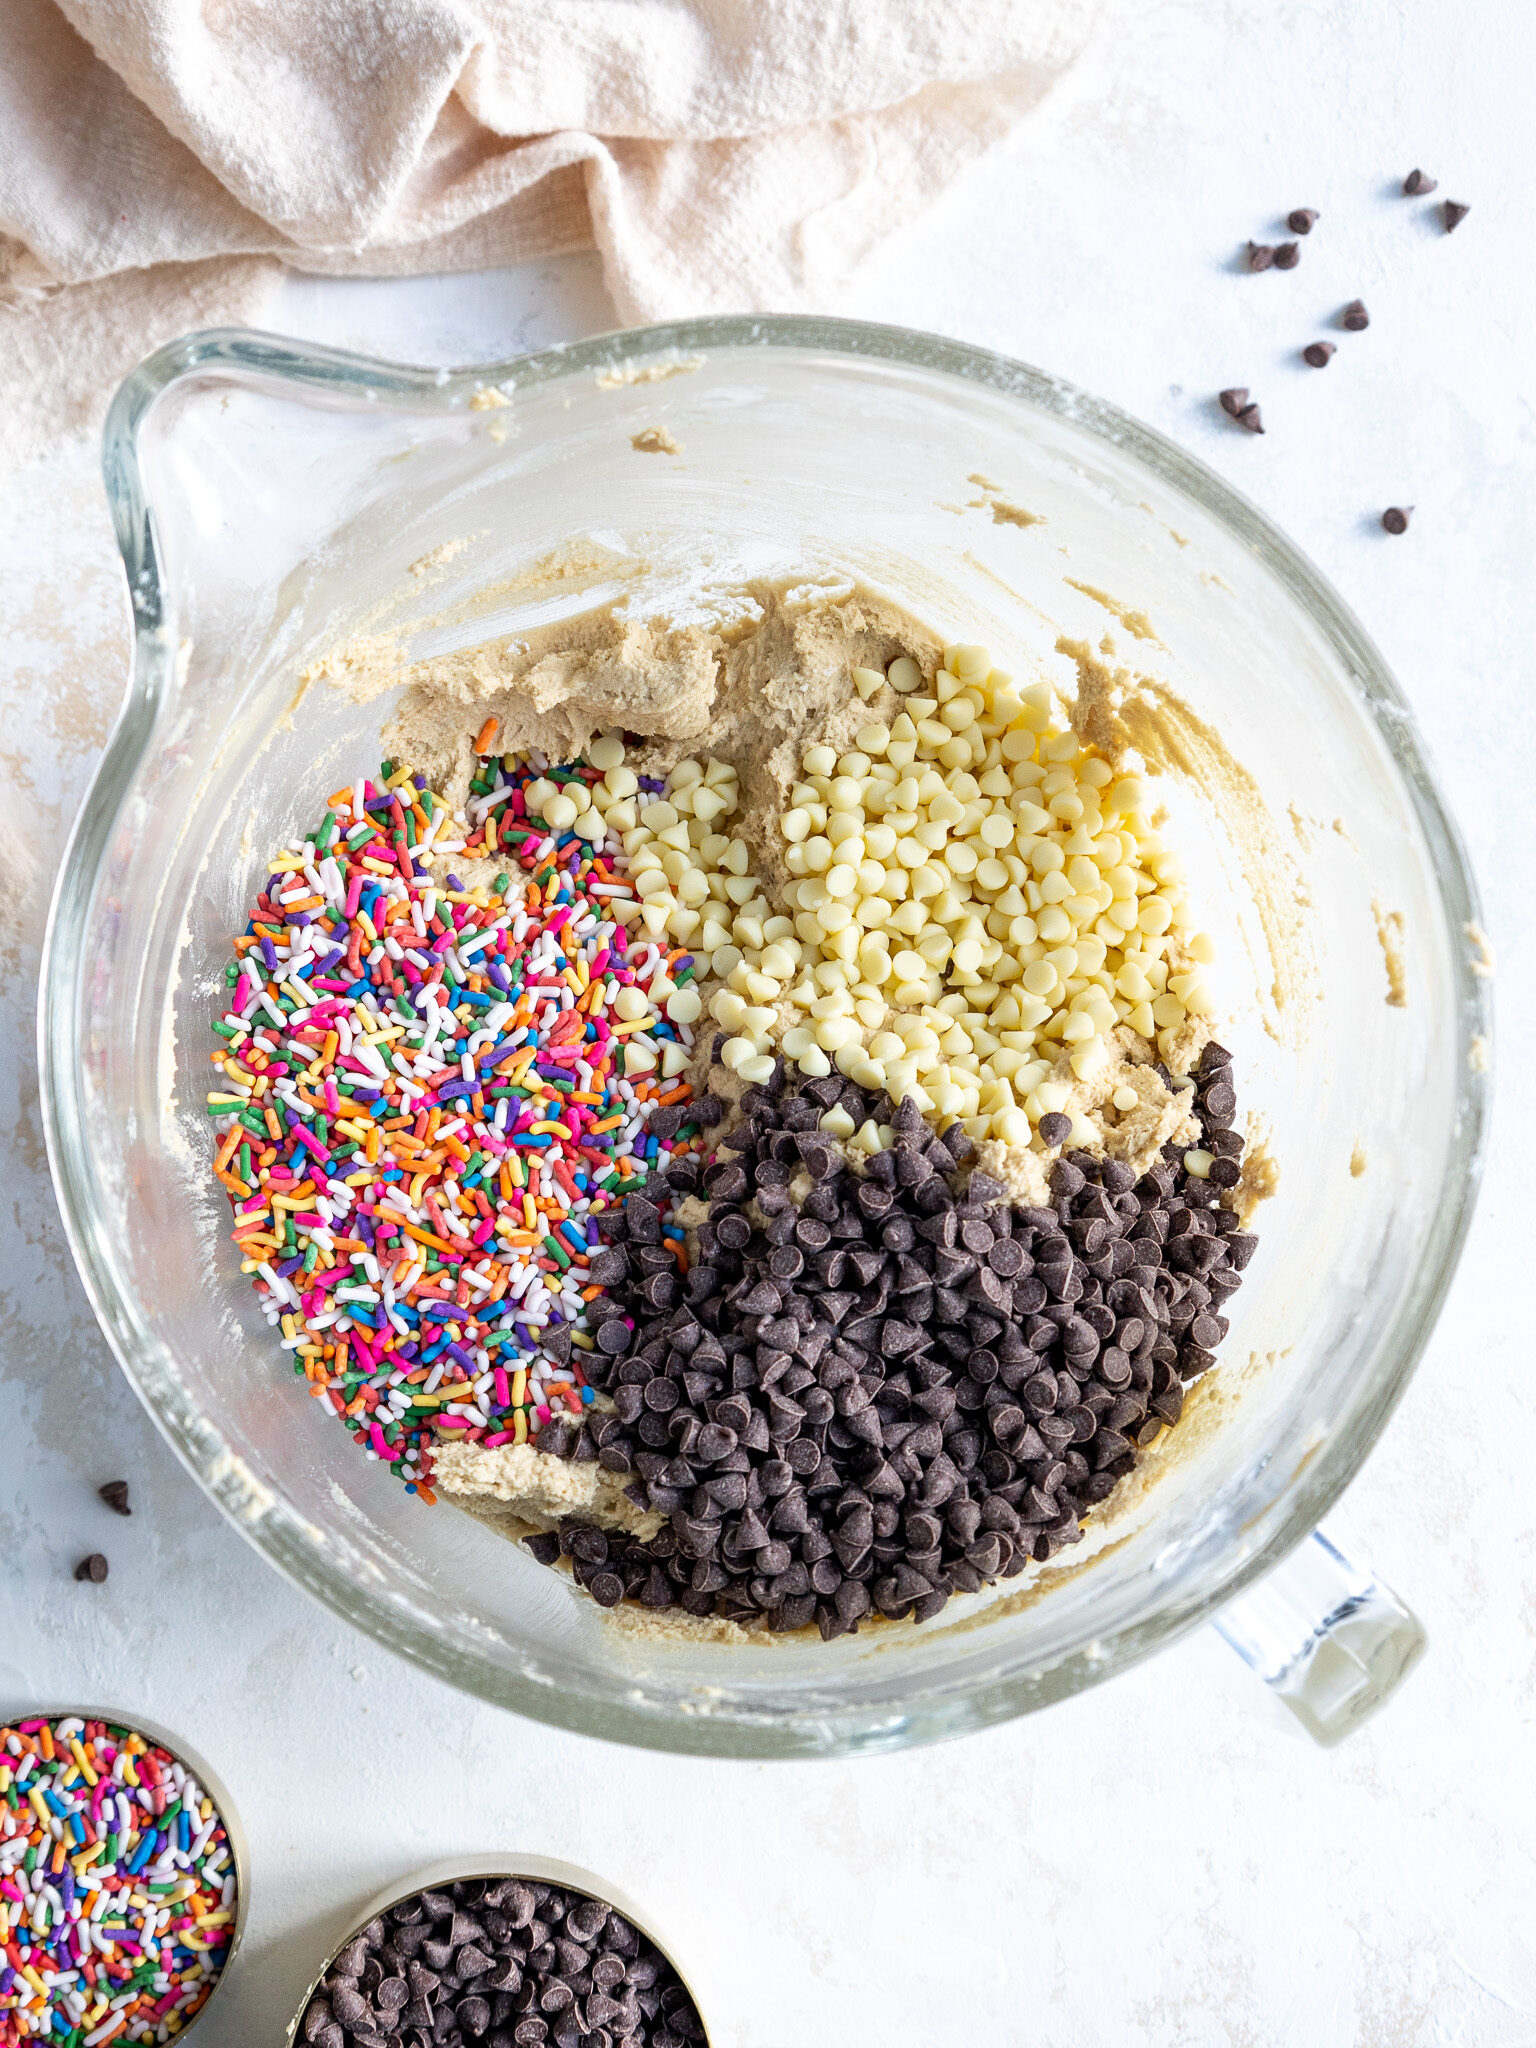 image of edible cookie dough being made with mini chocolate chips and sprinkles